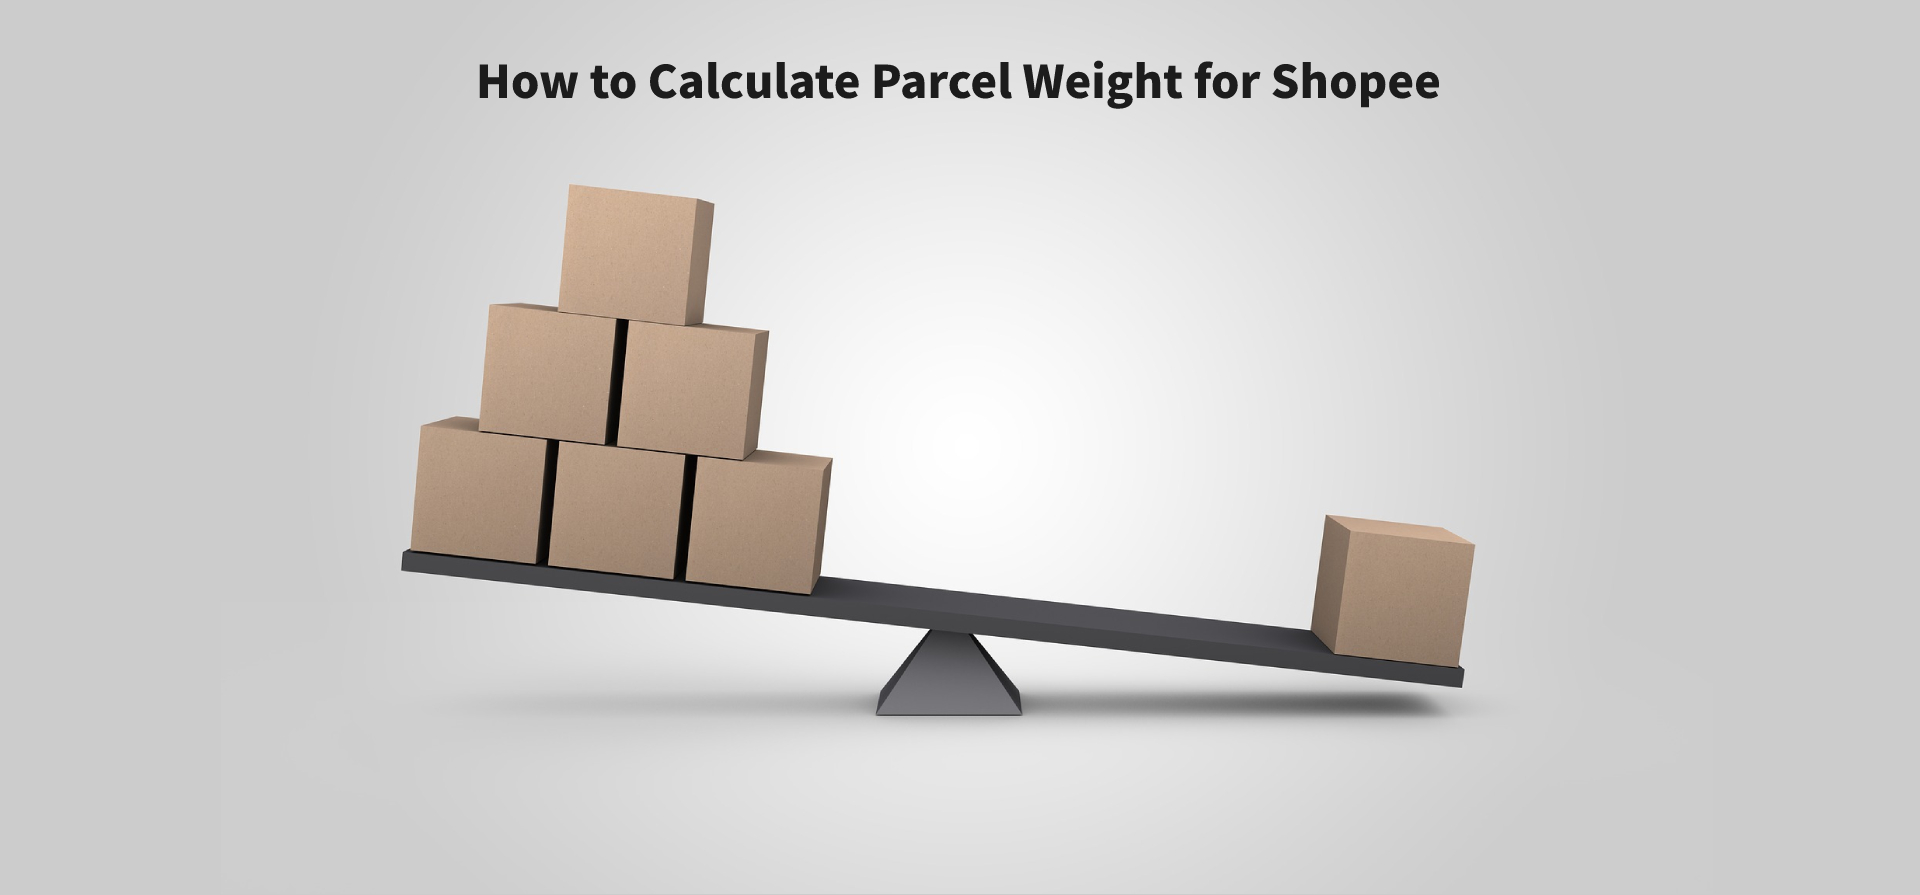 How to Calculate Parcel Weight for Shopee?